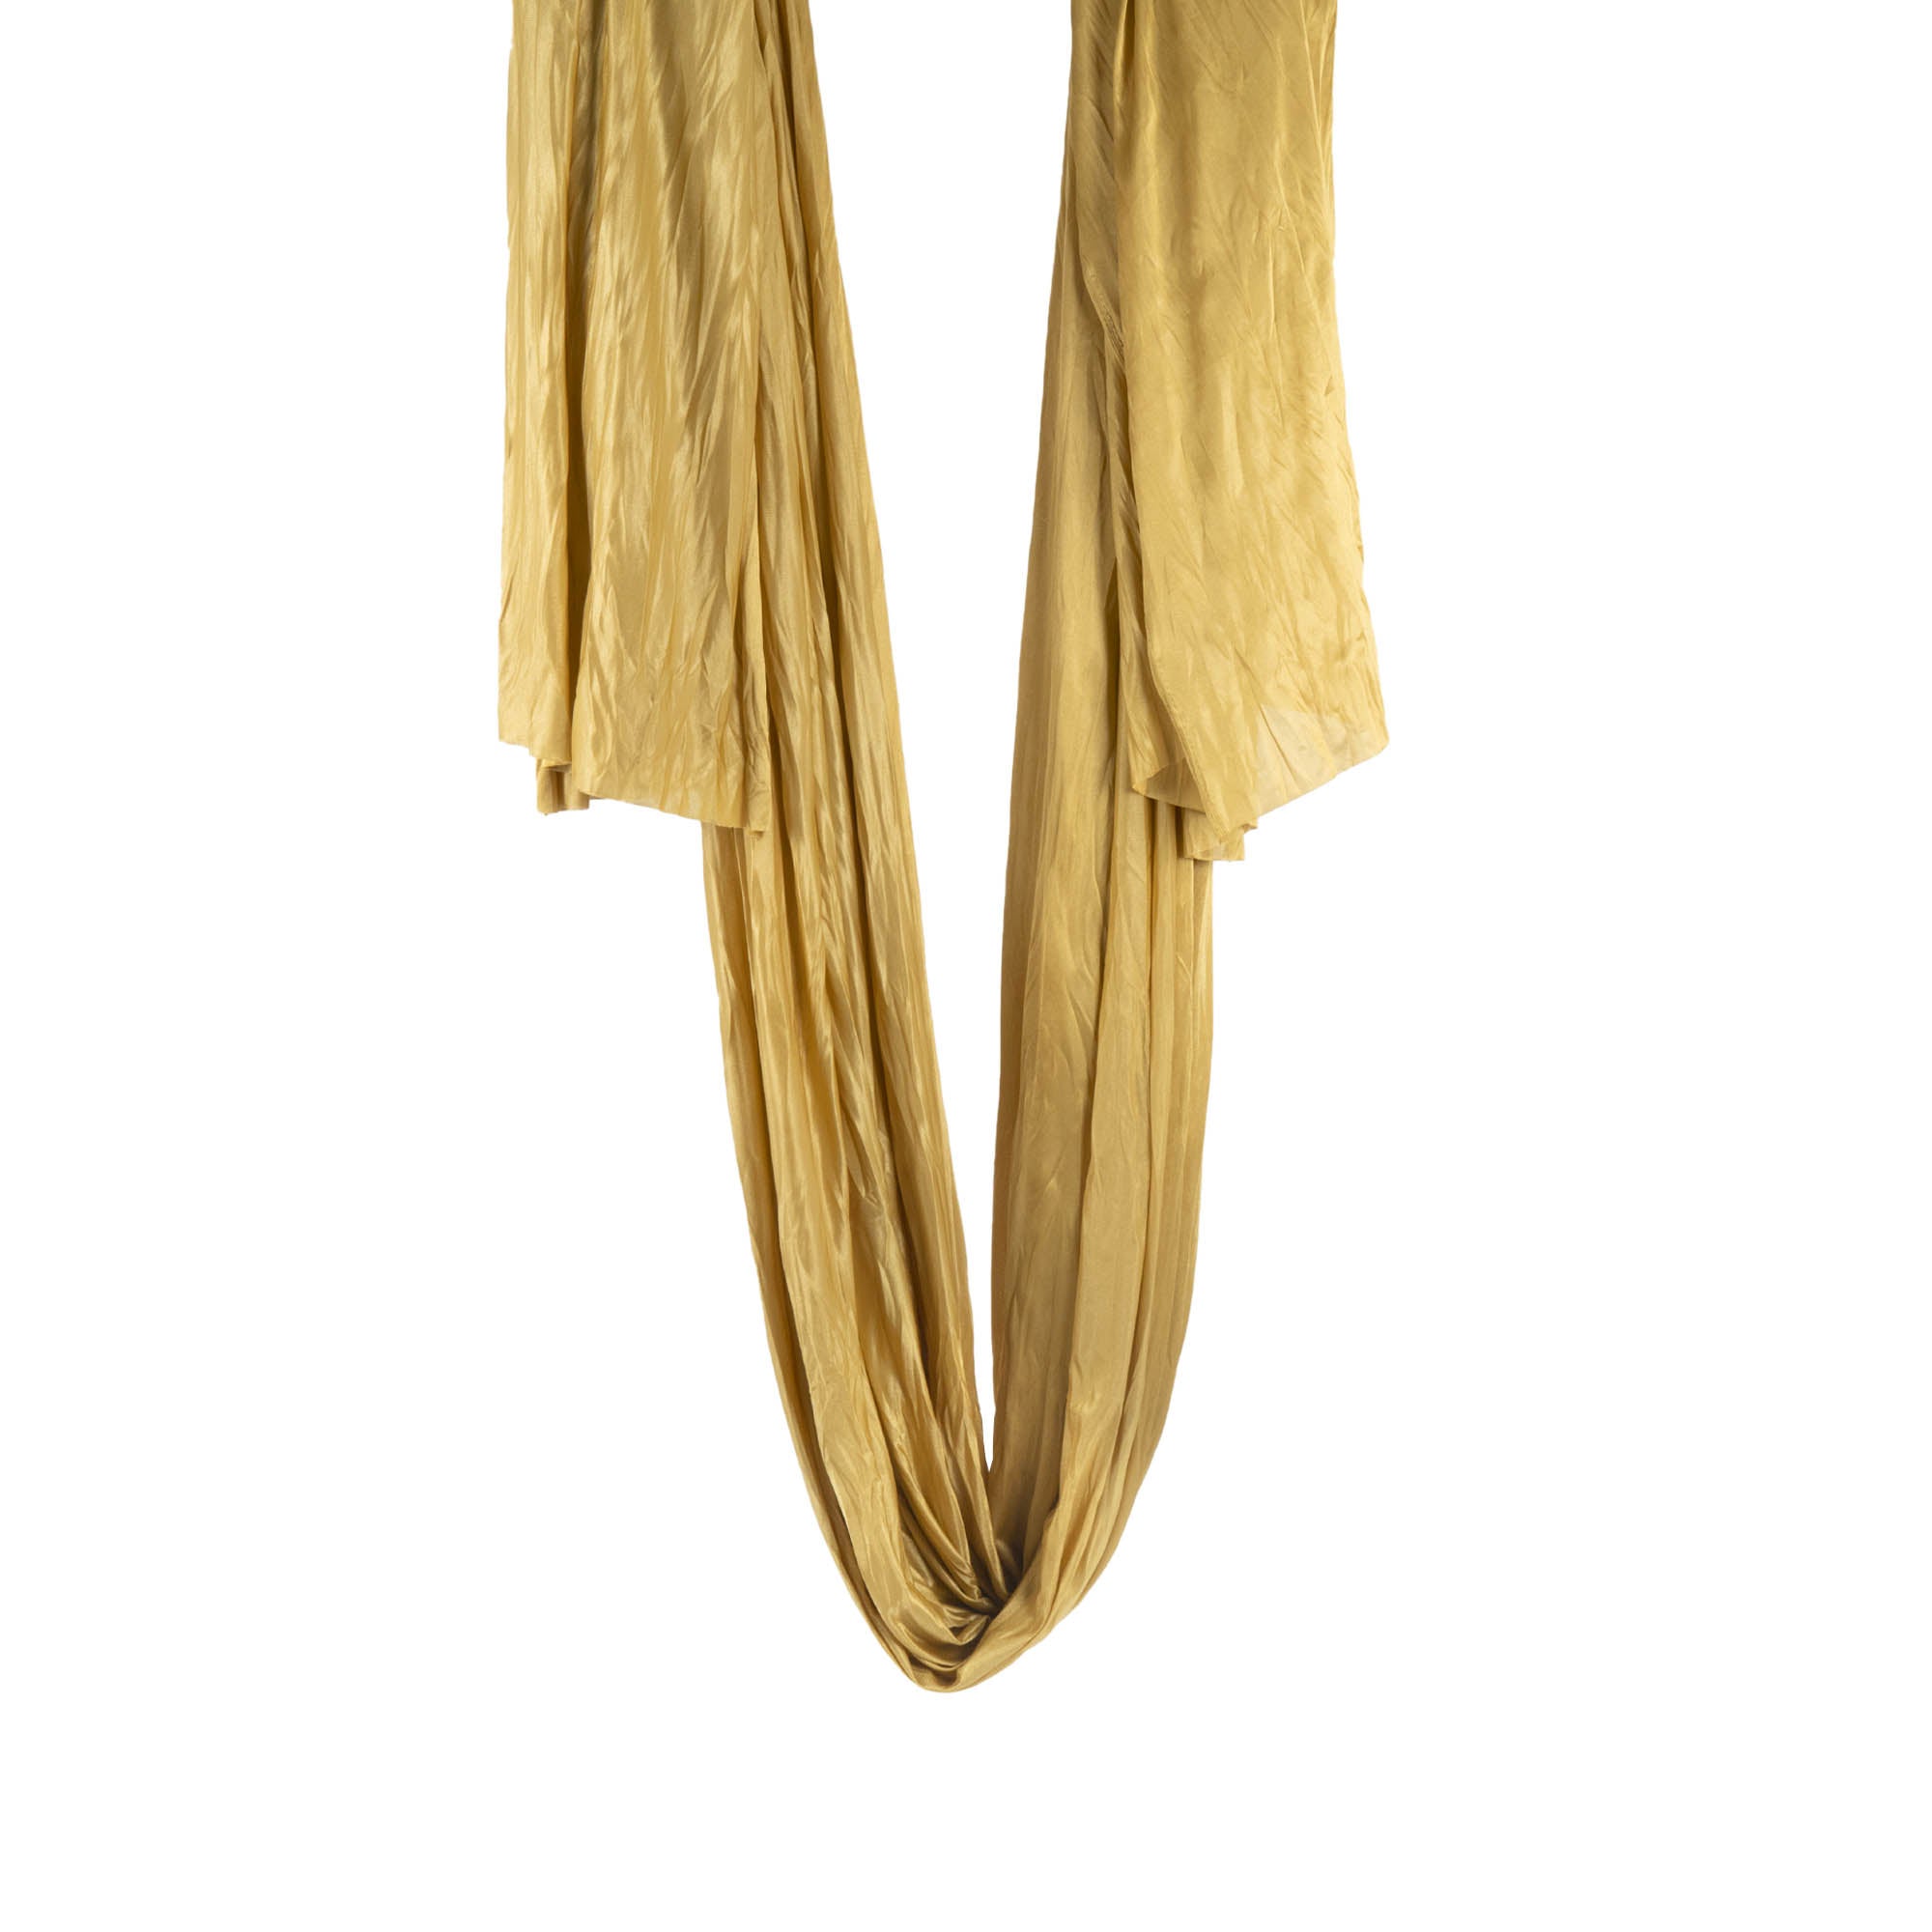 Prodigy 6m aerial yoga hammock in gold hanging